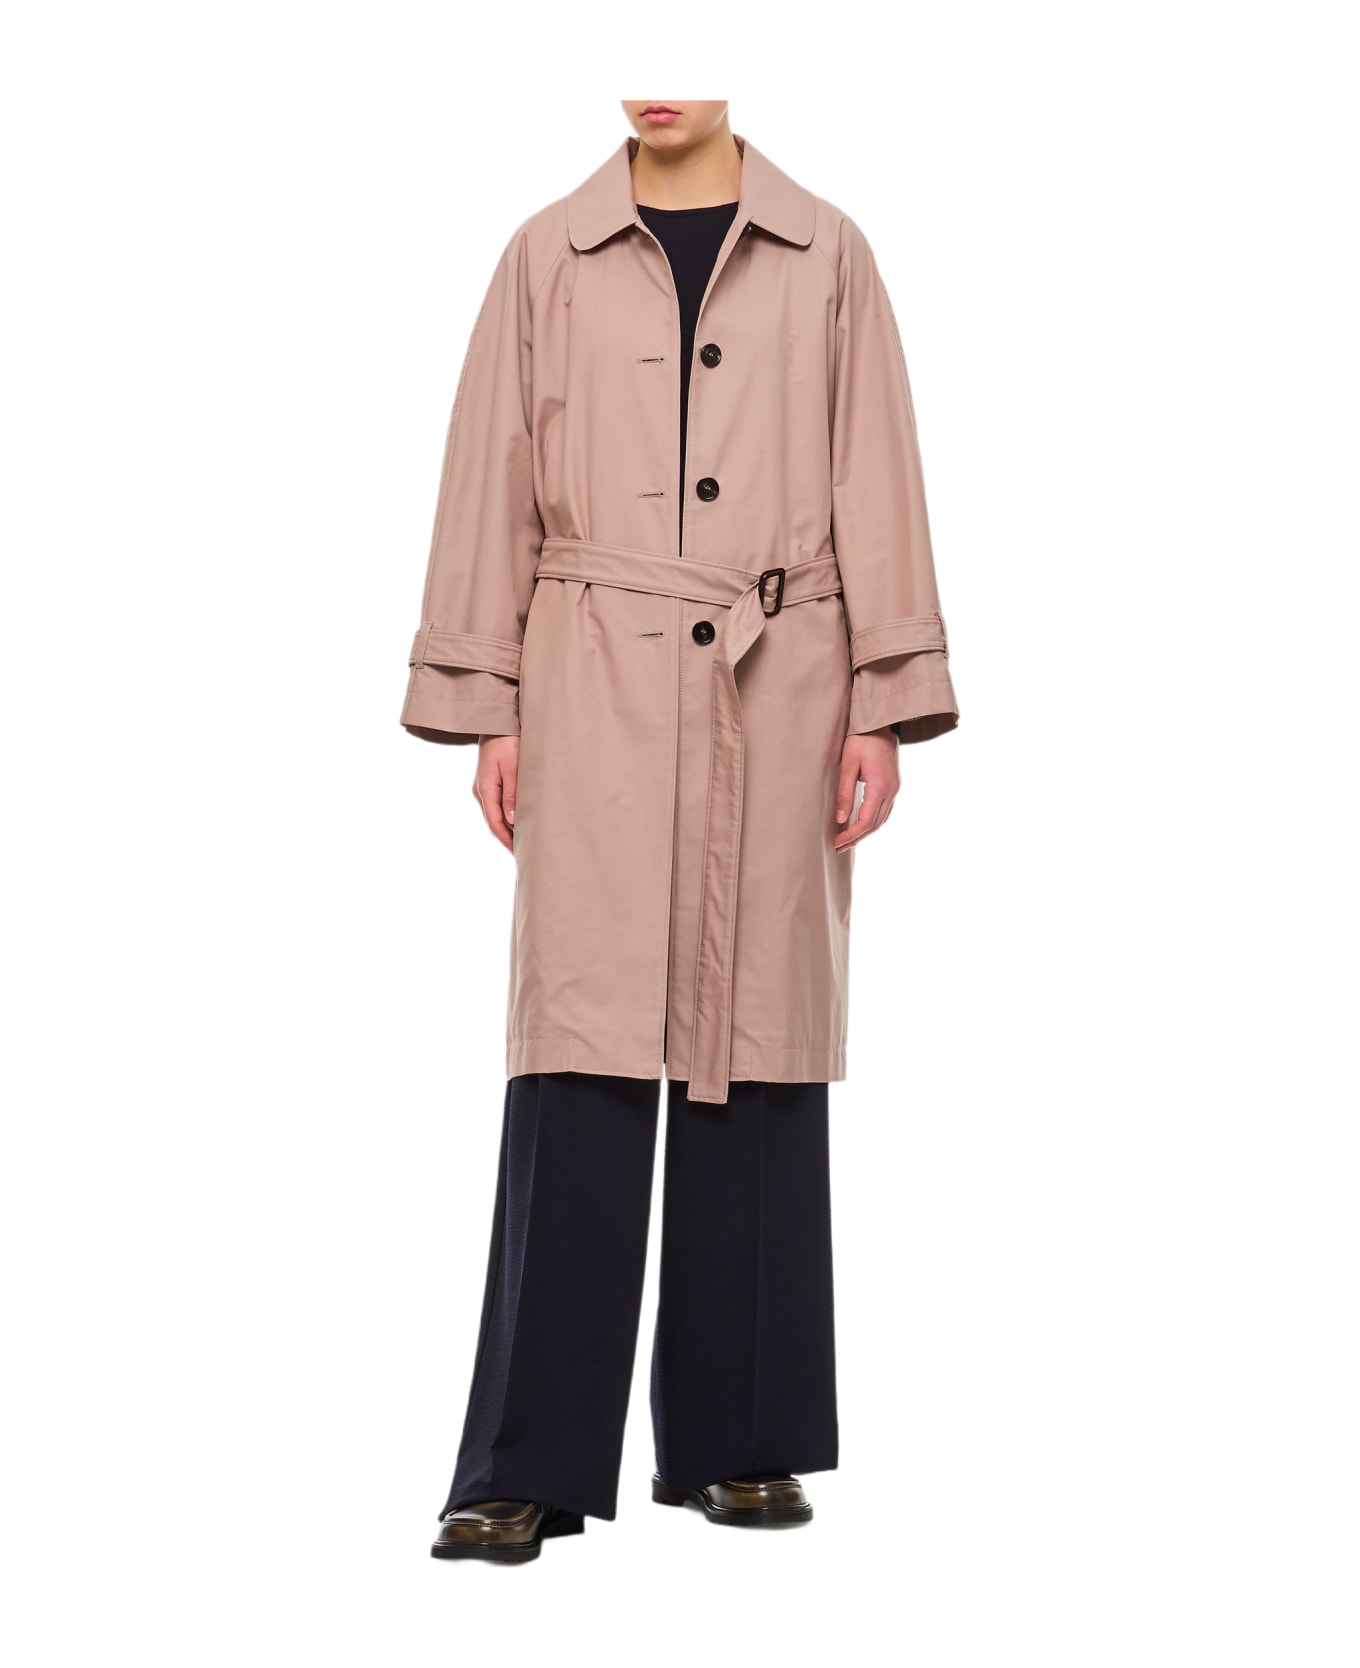 Max Mara The Cube Ftrench Trench Coat - Pink コート